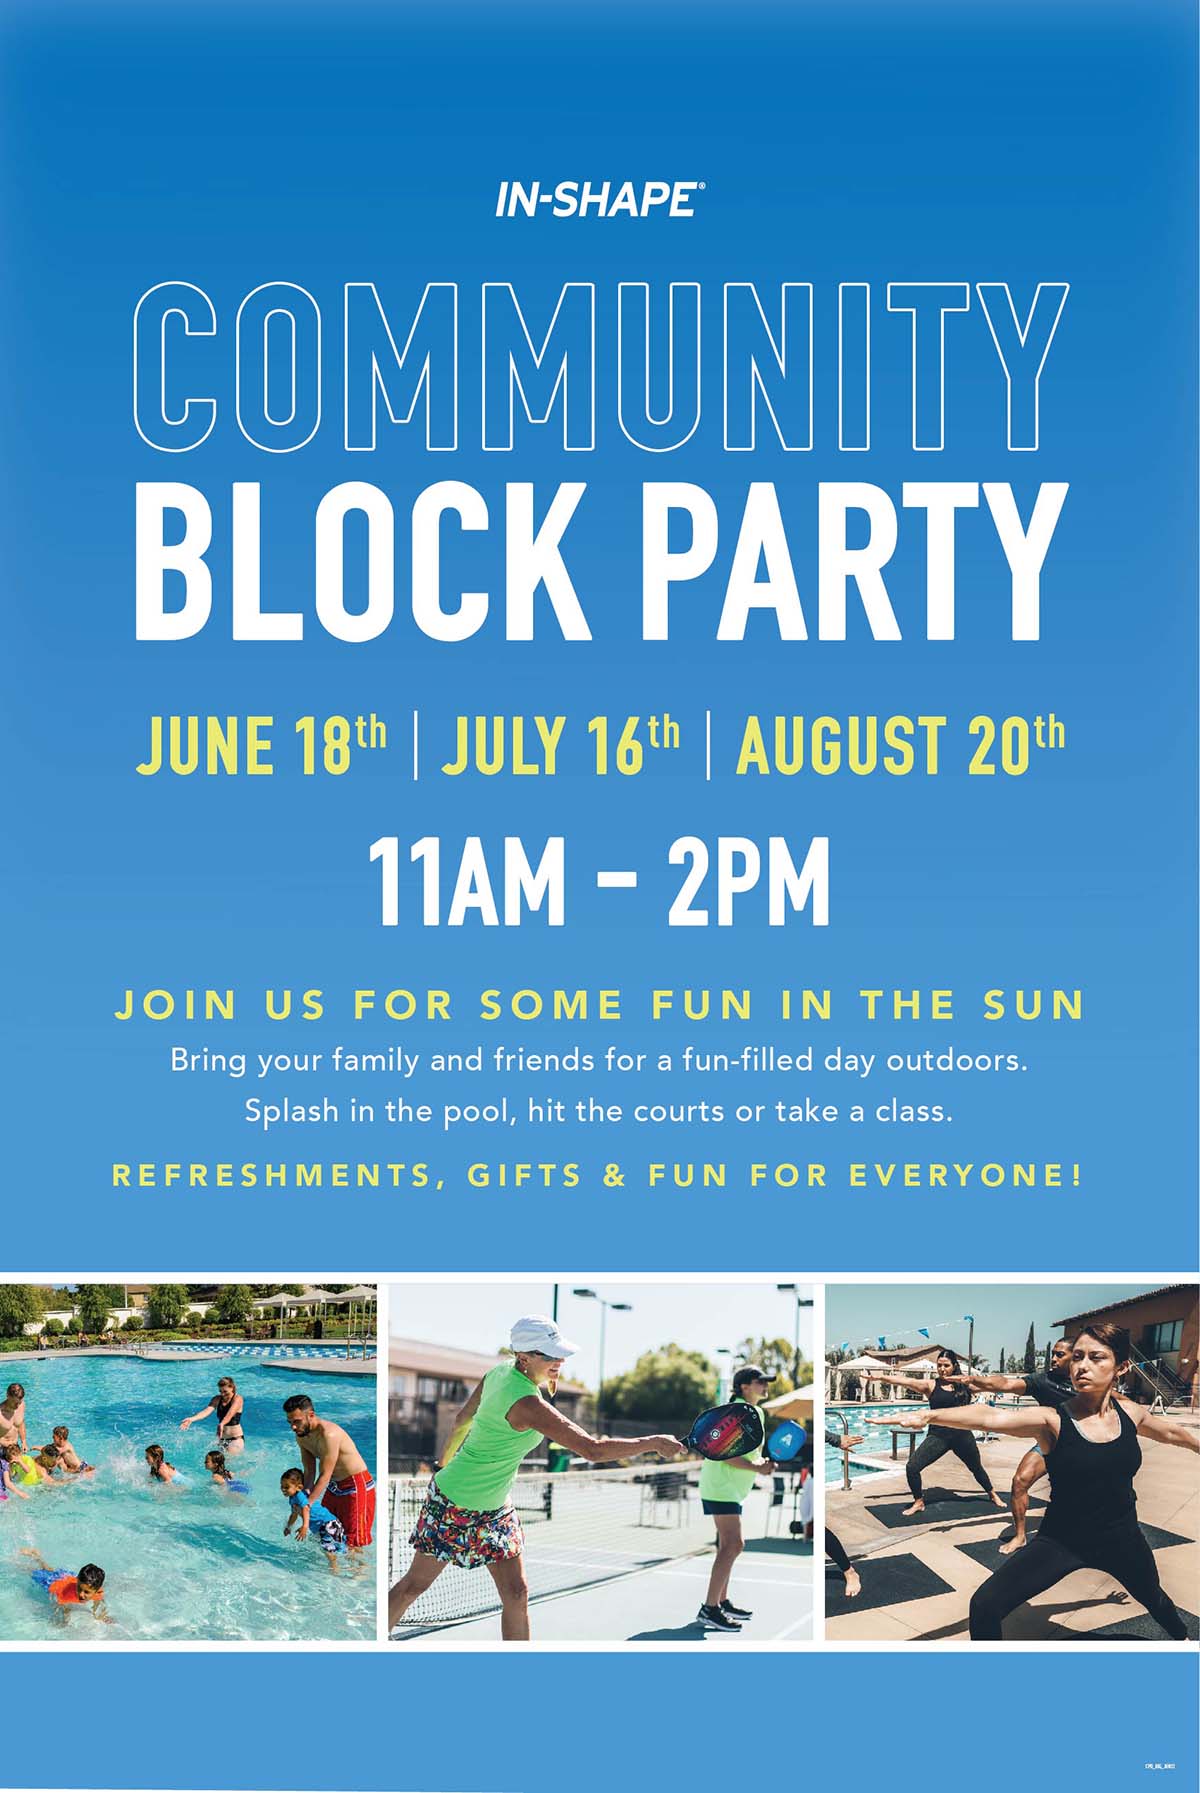 Community Block Party at In-Shape